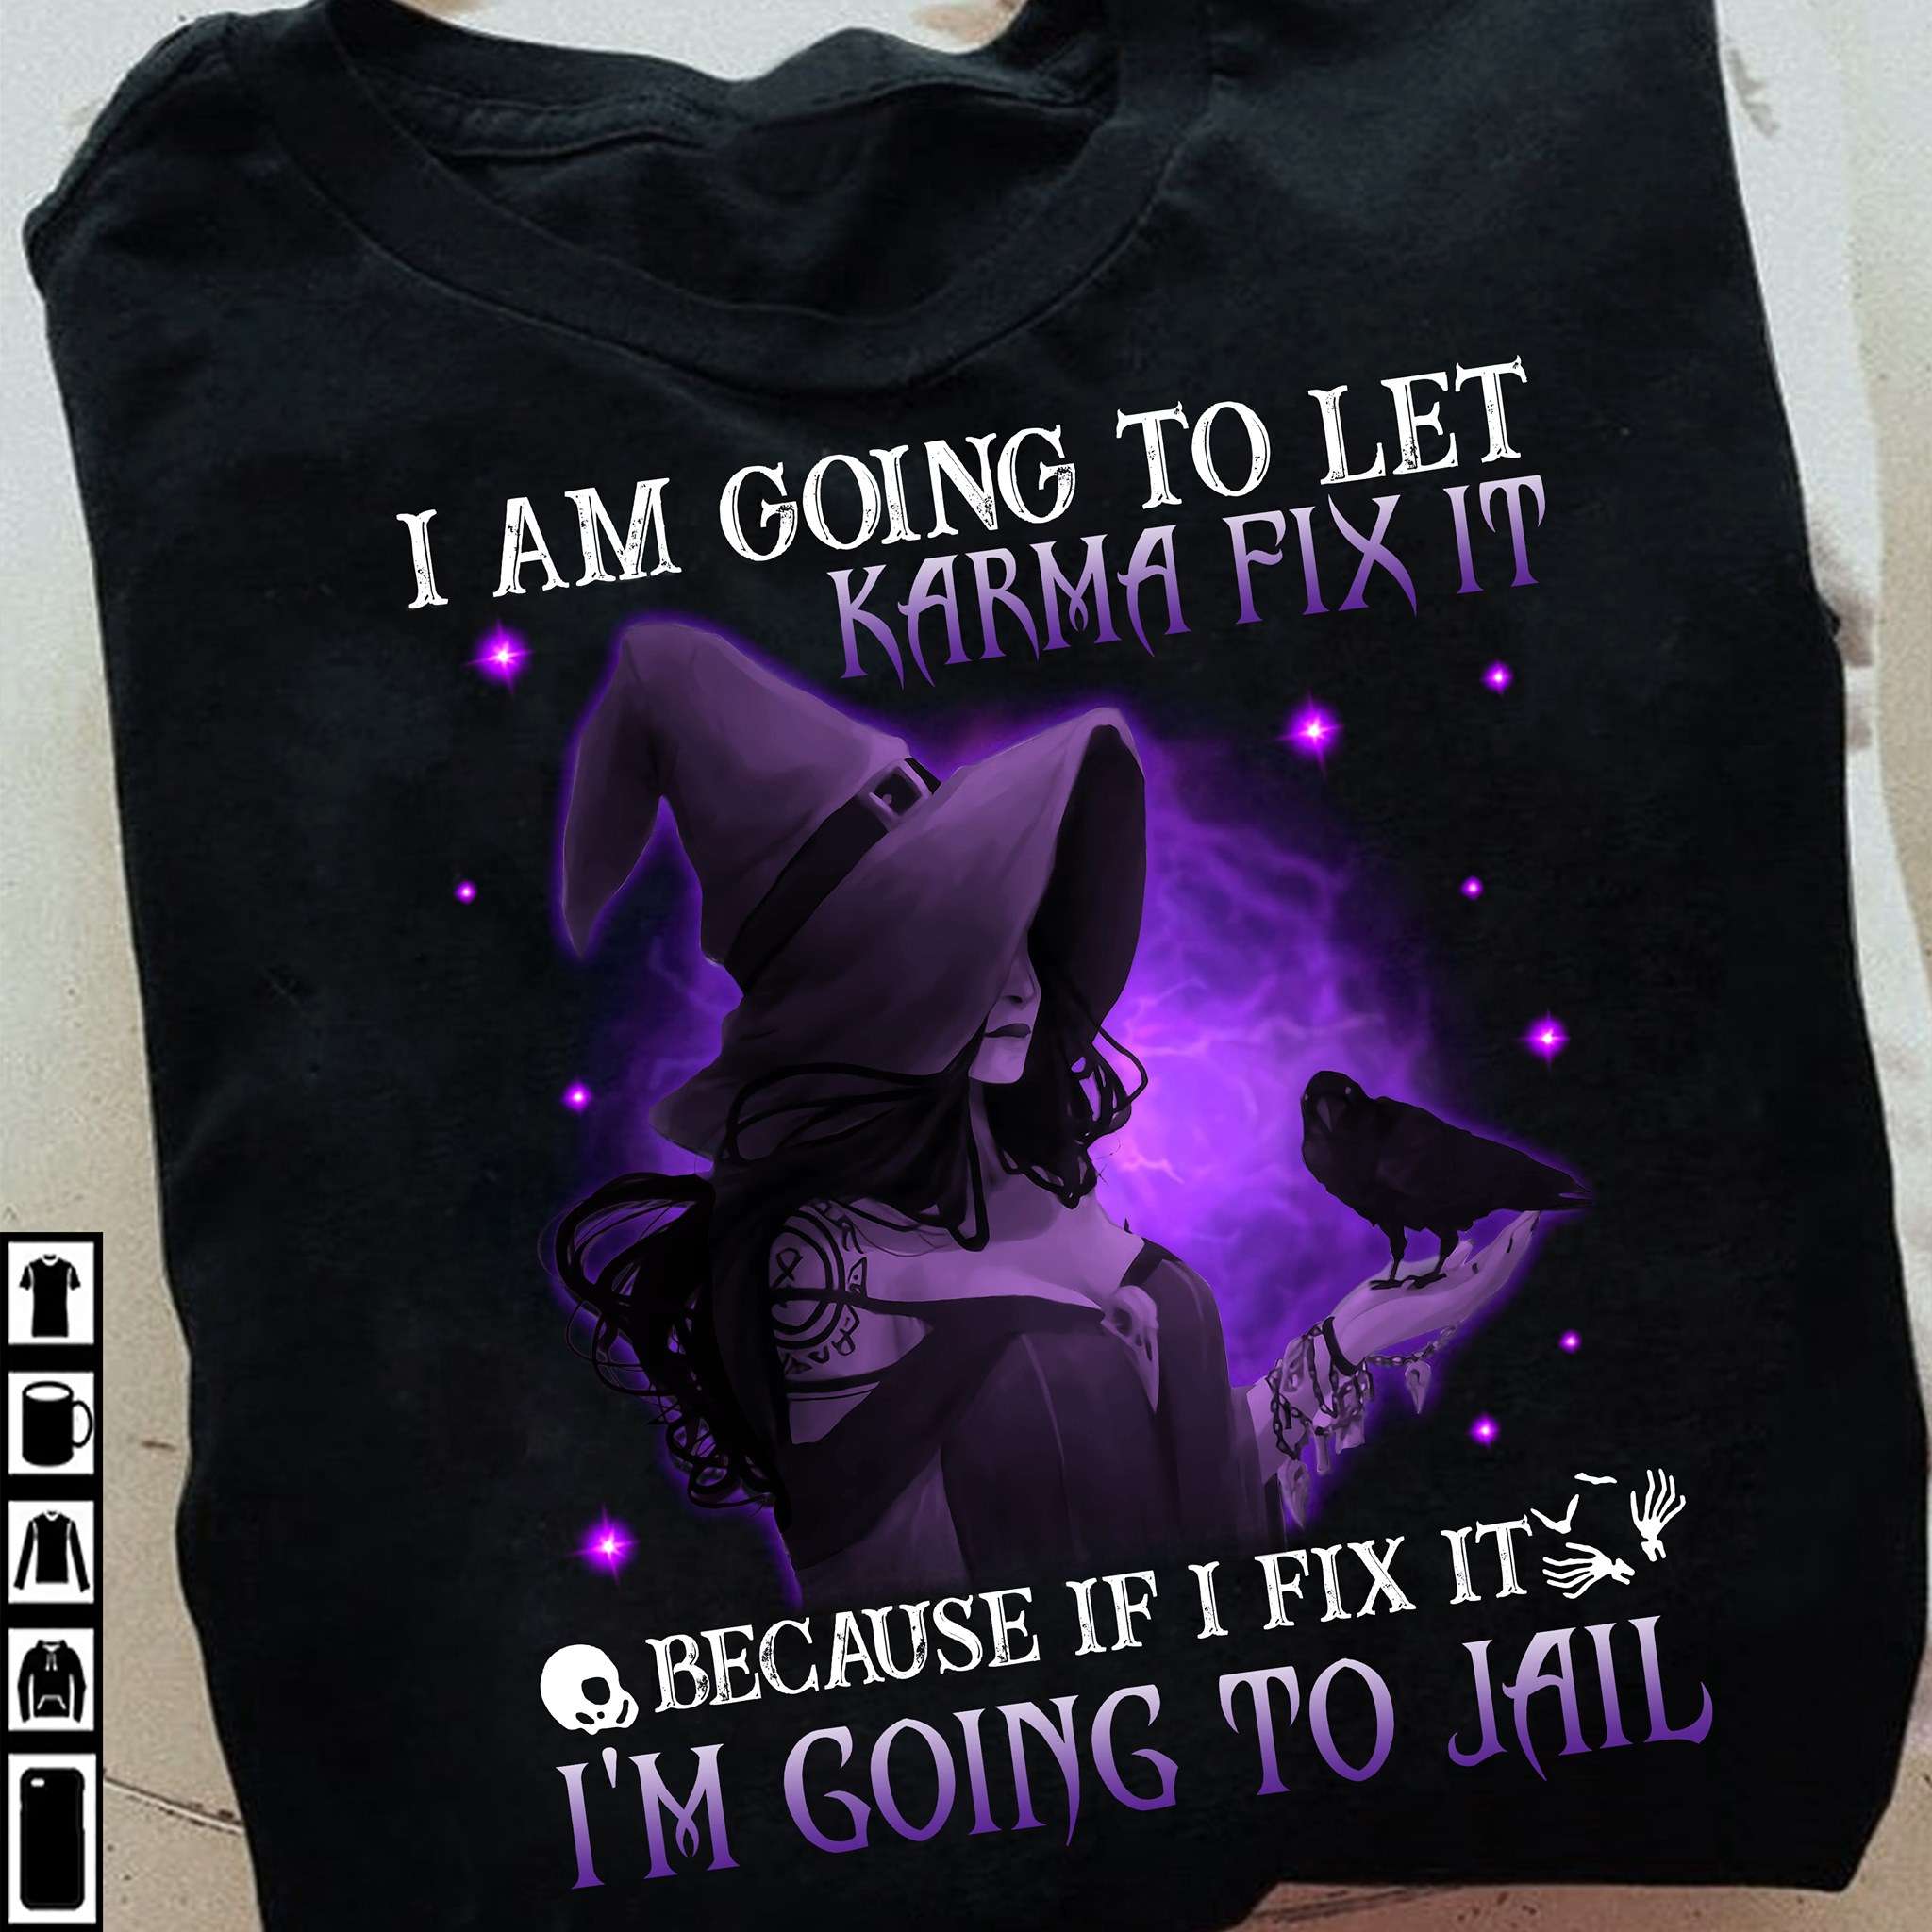 Halloween Beautiful Witch And Ravens - I am going to let karma fix it because if i fix it i'm going to jail